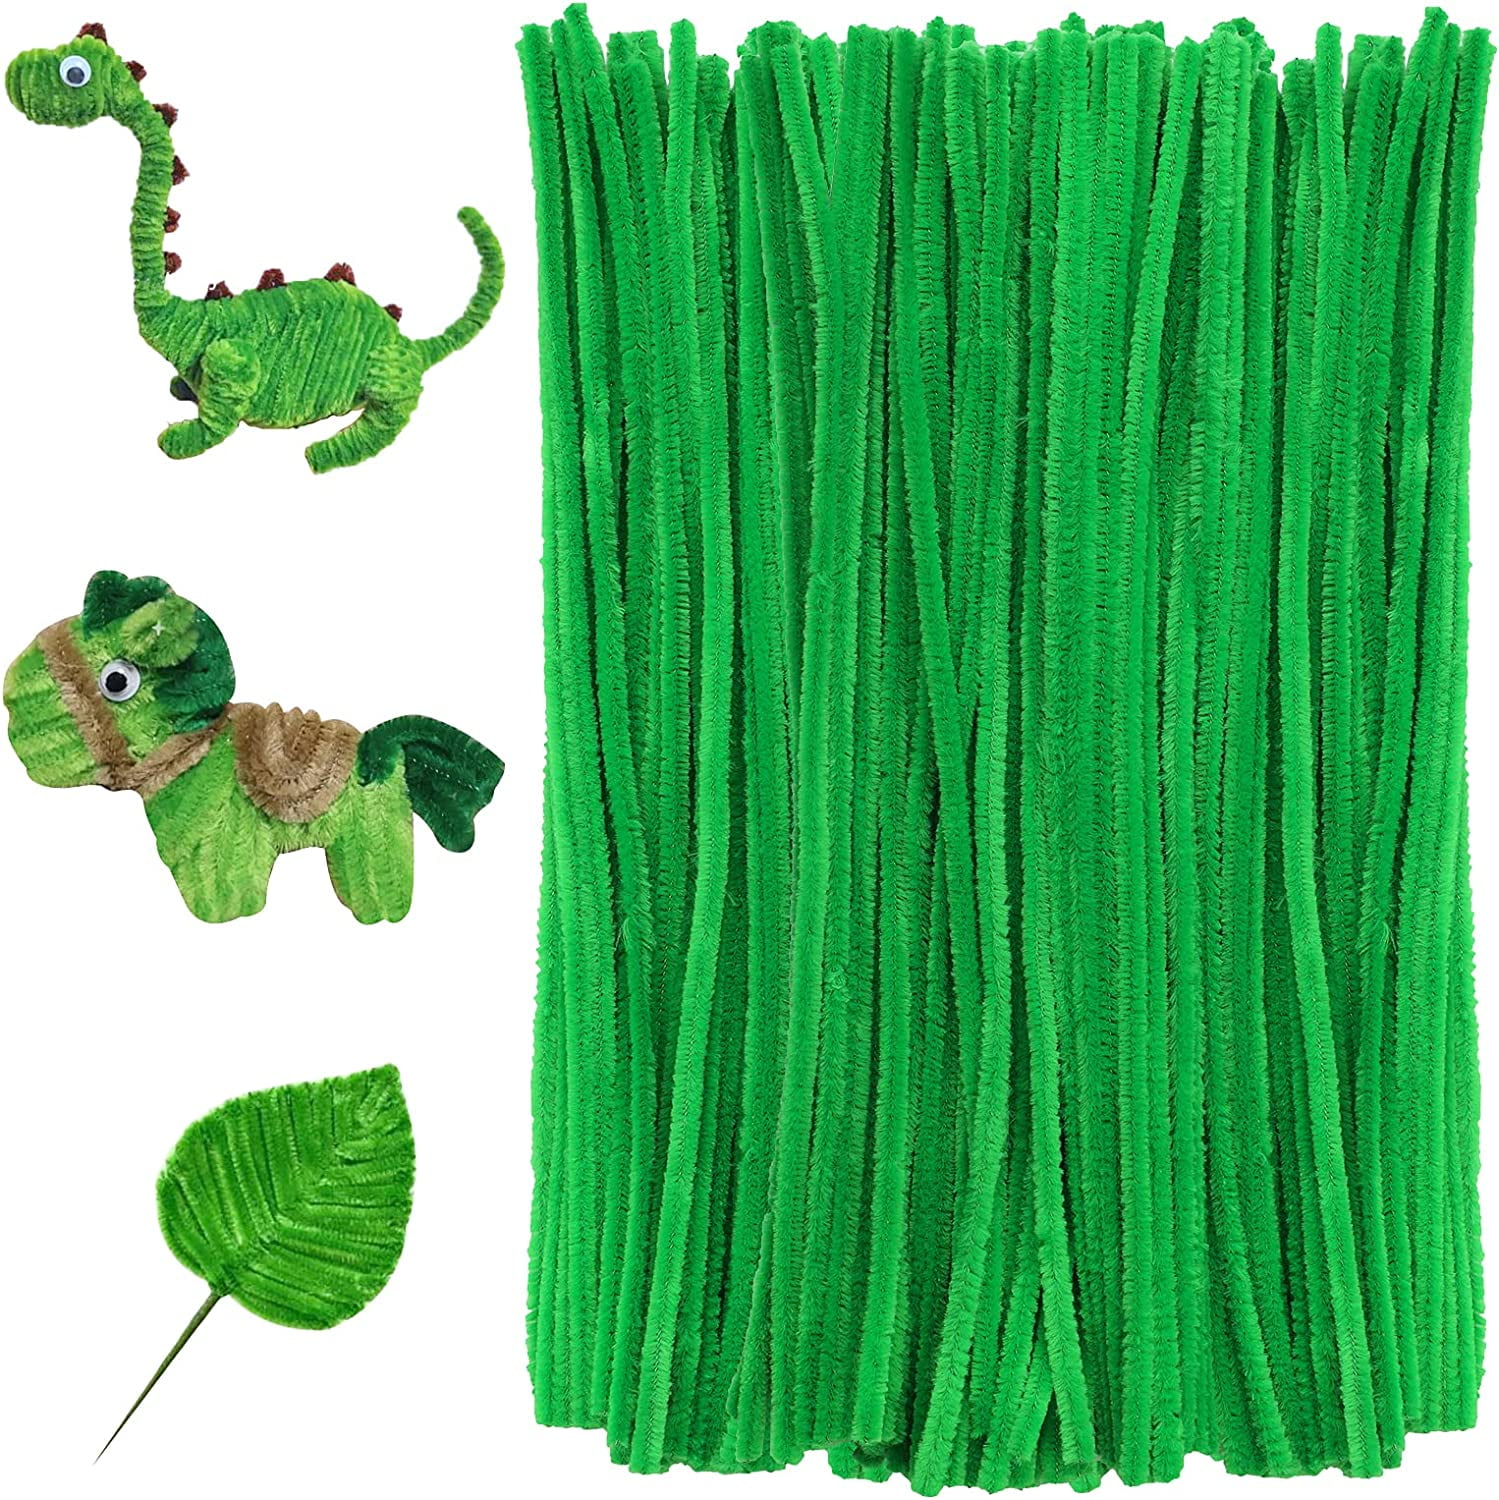 Chainplus 100 Pipe Cleaners - Chenille Pipe Cleaners Craft - Colorful Pipe  Cleaners for Crafts - Colored Pipe Cleaners for Kids - Bulk Pipe Cleaners 